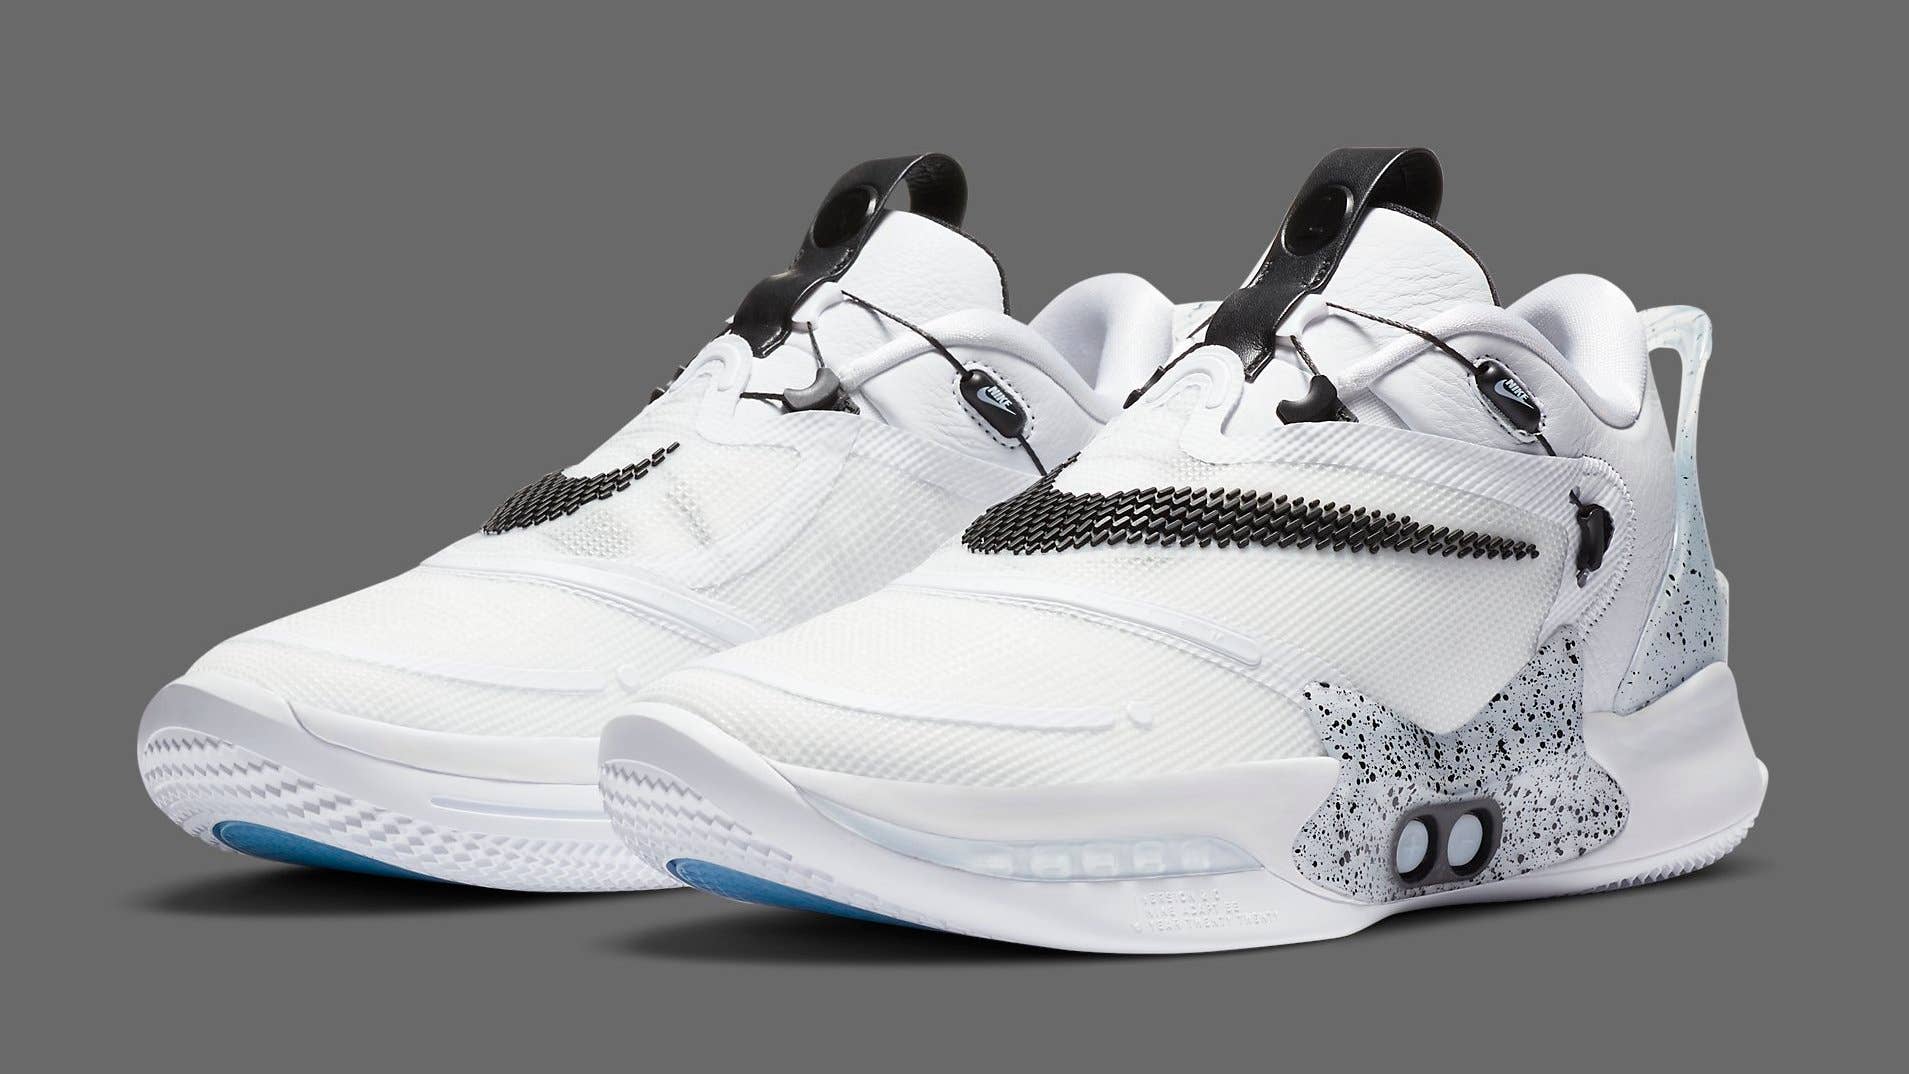 parque Natural Mismo Guardería White Cement' Nike Adapt BB 2.0s Are Releasing Soon | Complex